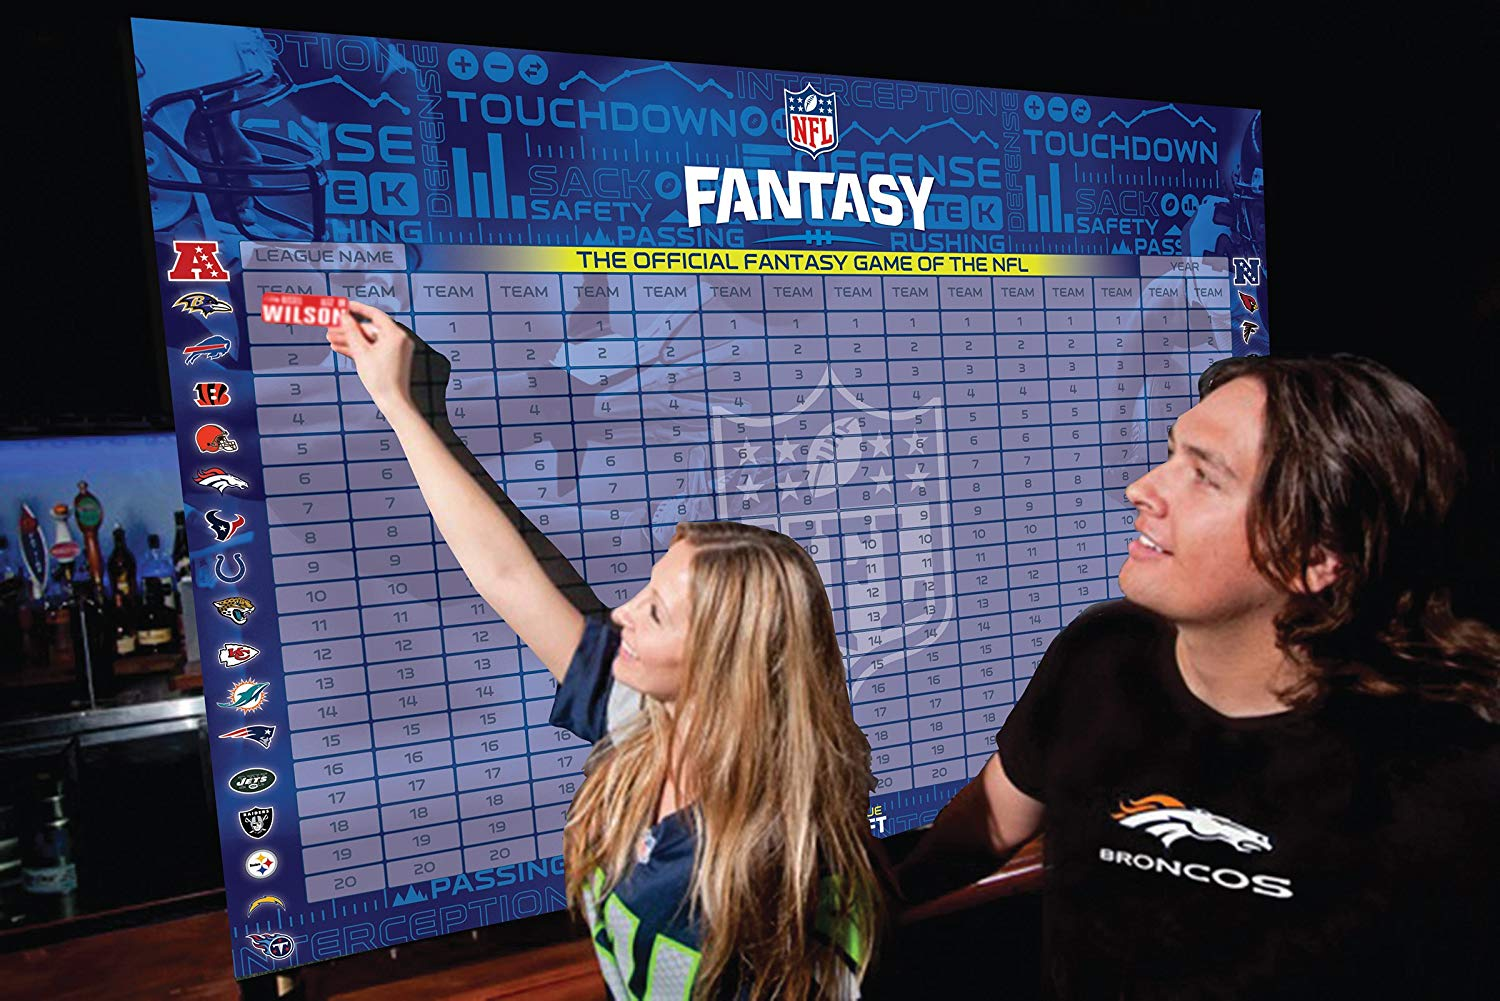 It wouldn't be football without a whiff of fantasy.<br><br>Take your league analogue with a draft kit you can get <a href="https://amzn.to/2MgKrVQ" "nofollow" target="_blank">here</a>.